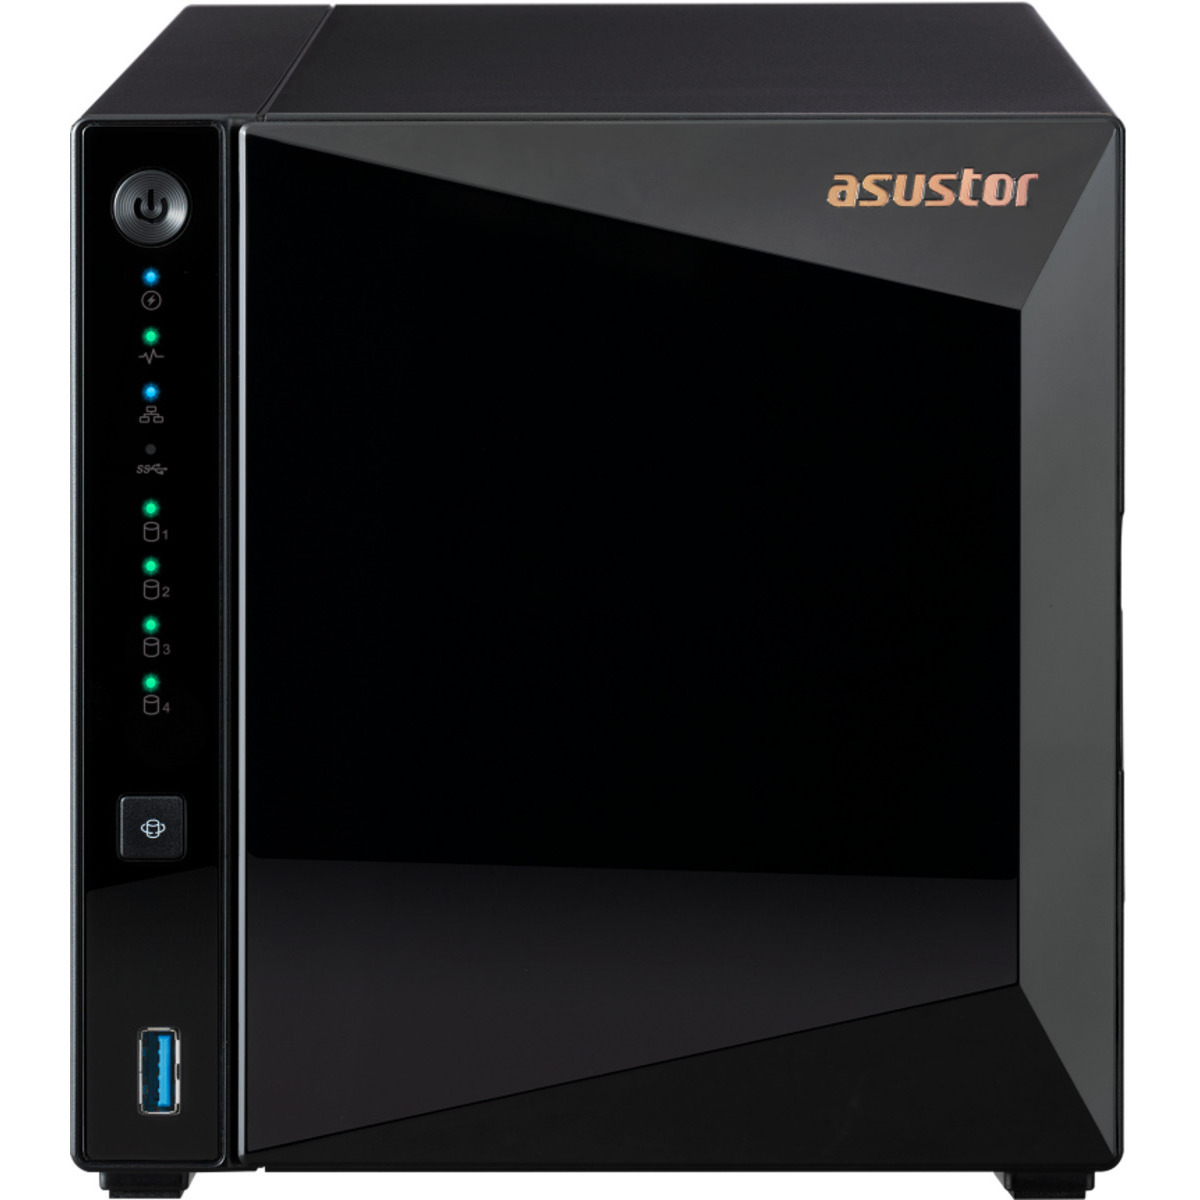 ASUSTOR DRIVESTOR 4 Pro Gen2 AS3304T v2 24tb 4-Bay Desktop Personal / Basic Home / Small Office NAS - Network Attached Storage Device 3x8tb Western Digital Gold WD8004FRYZ 3.5 7200rpm SATA 6Gb/s HDD ENTERPRISE Class Drives Installed - Burn-In Tested - ON SALE DRIVESTOR 4 Pro Gen2 AS3304T v2